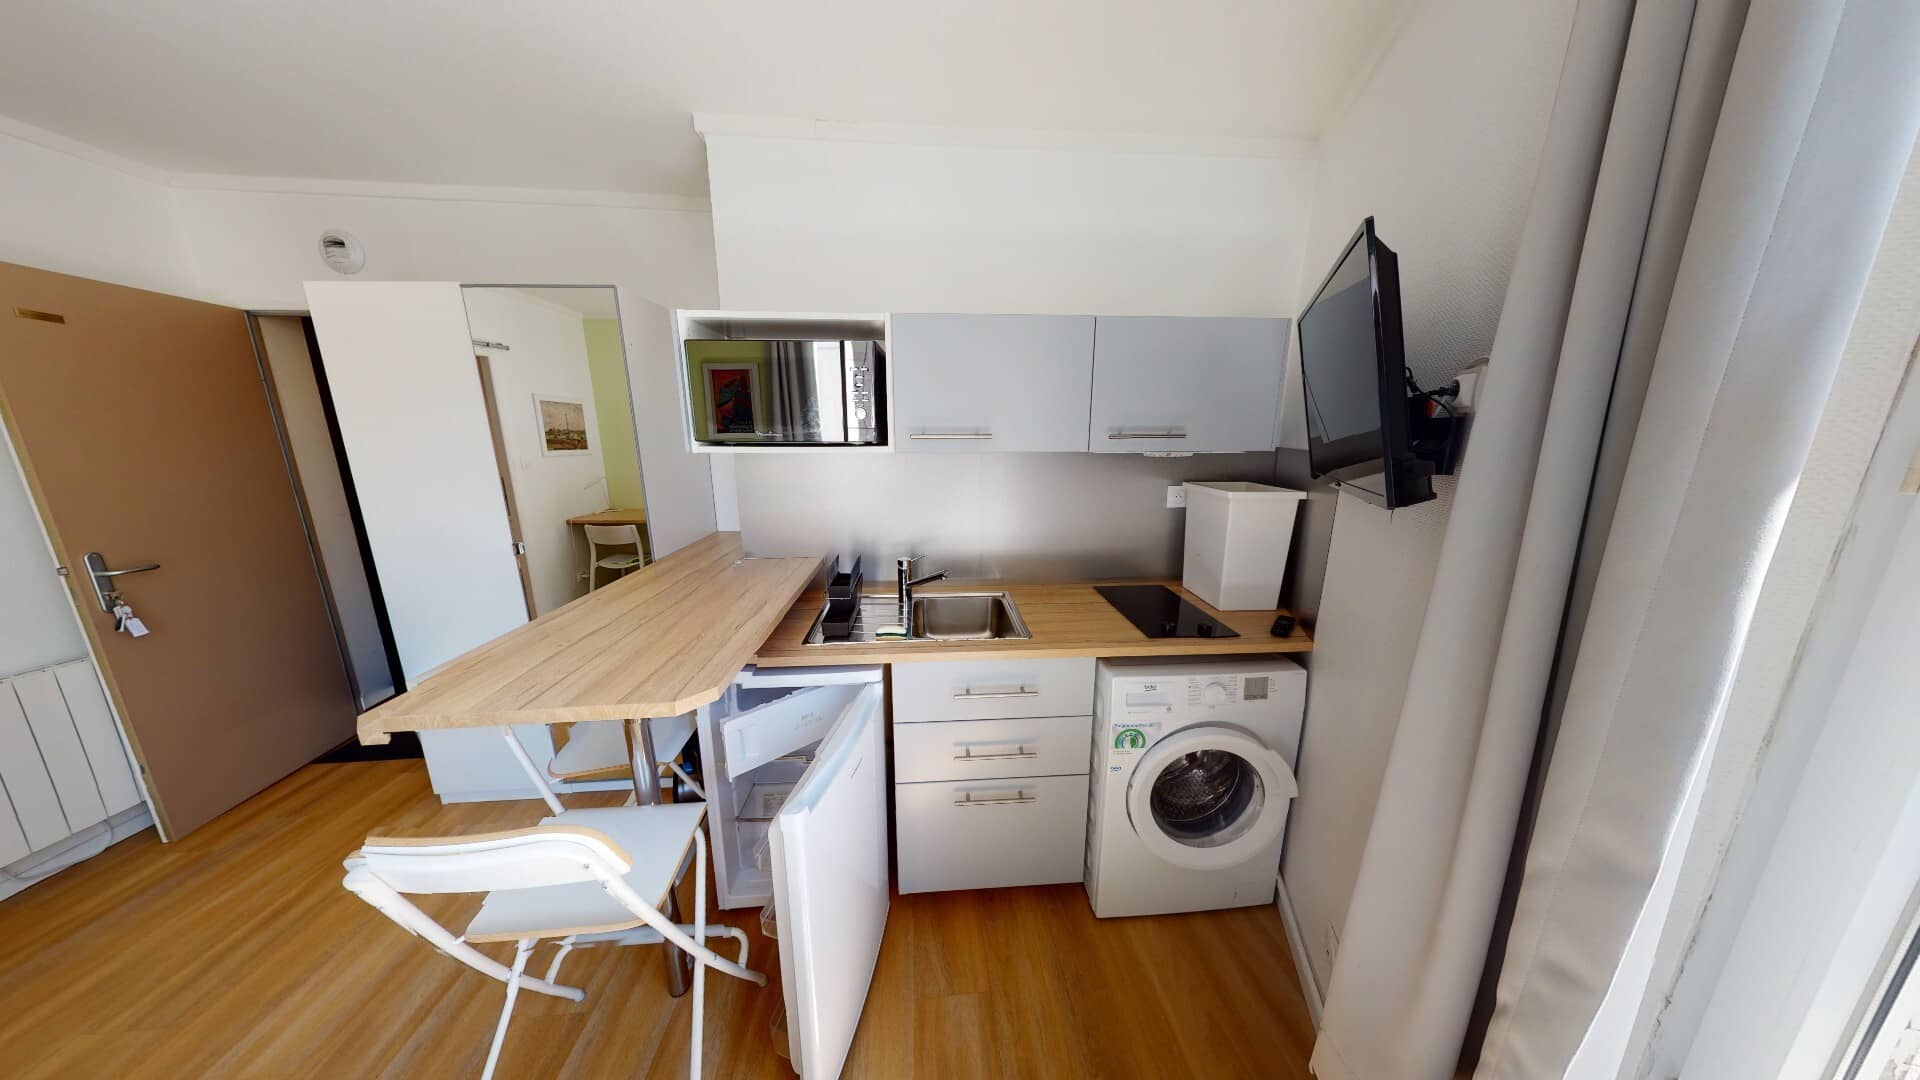 Location Appartement type F1 Le Havre m04